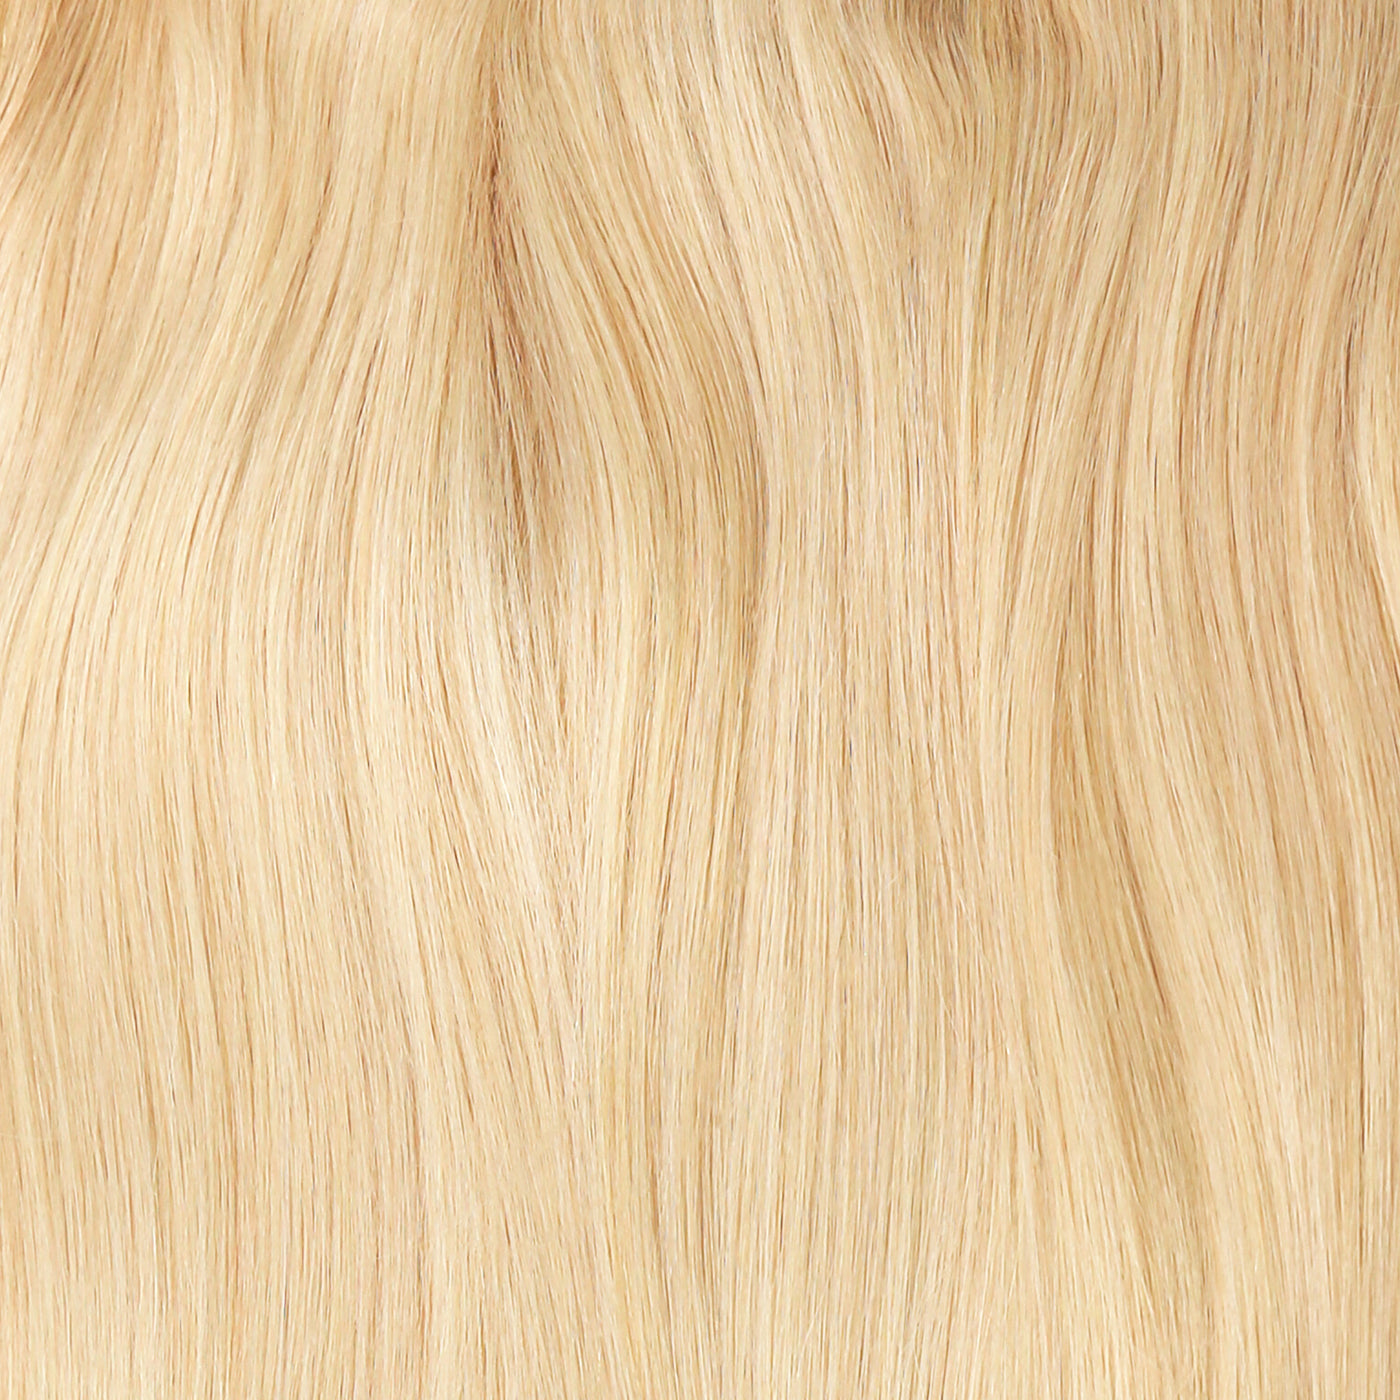 #24 AquaLyna Ultra Narrow Clip In Hair Extensions